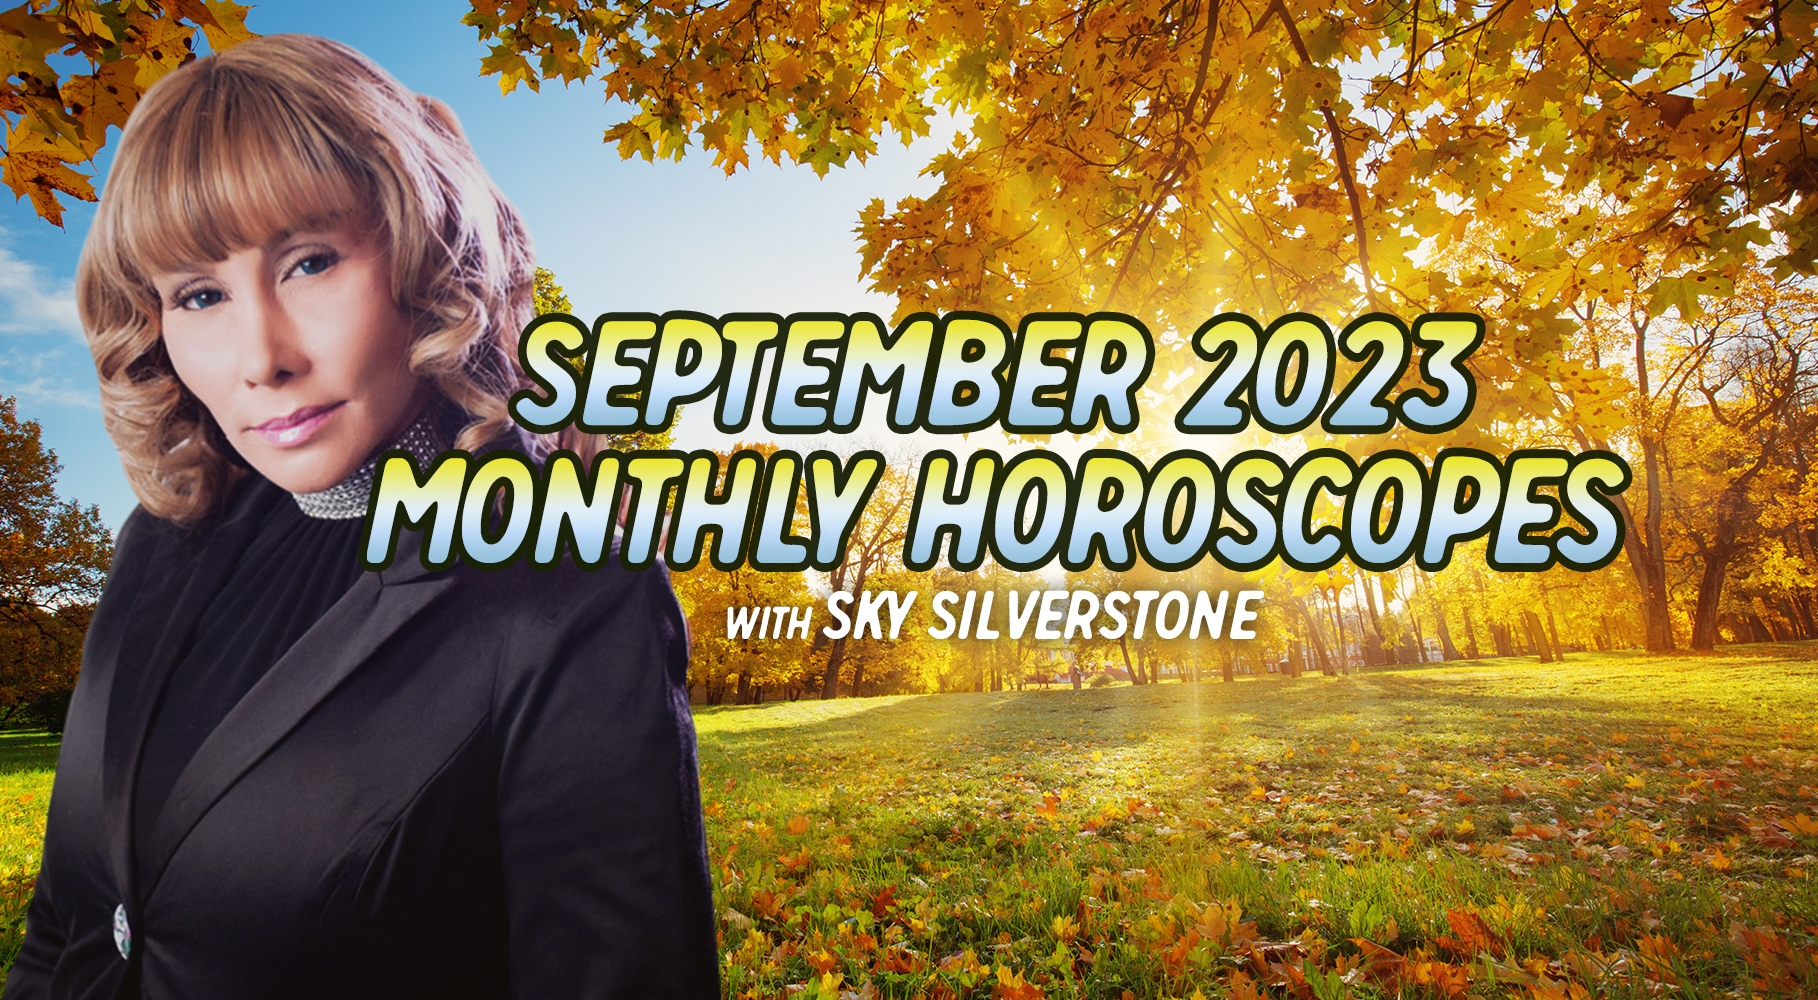 Sept 2023 Monthly Horoscopes with Sky Silverstone